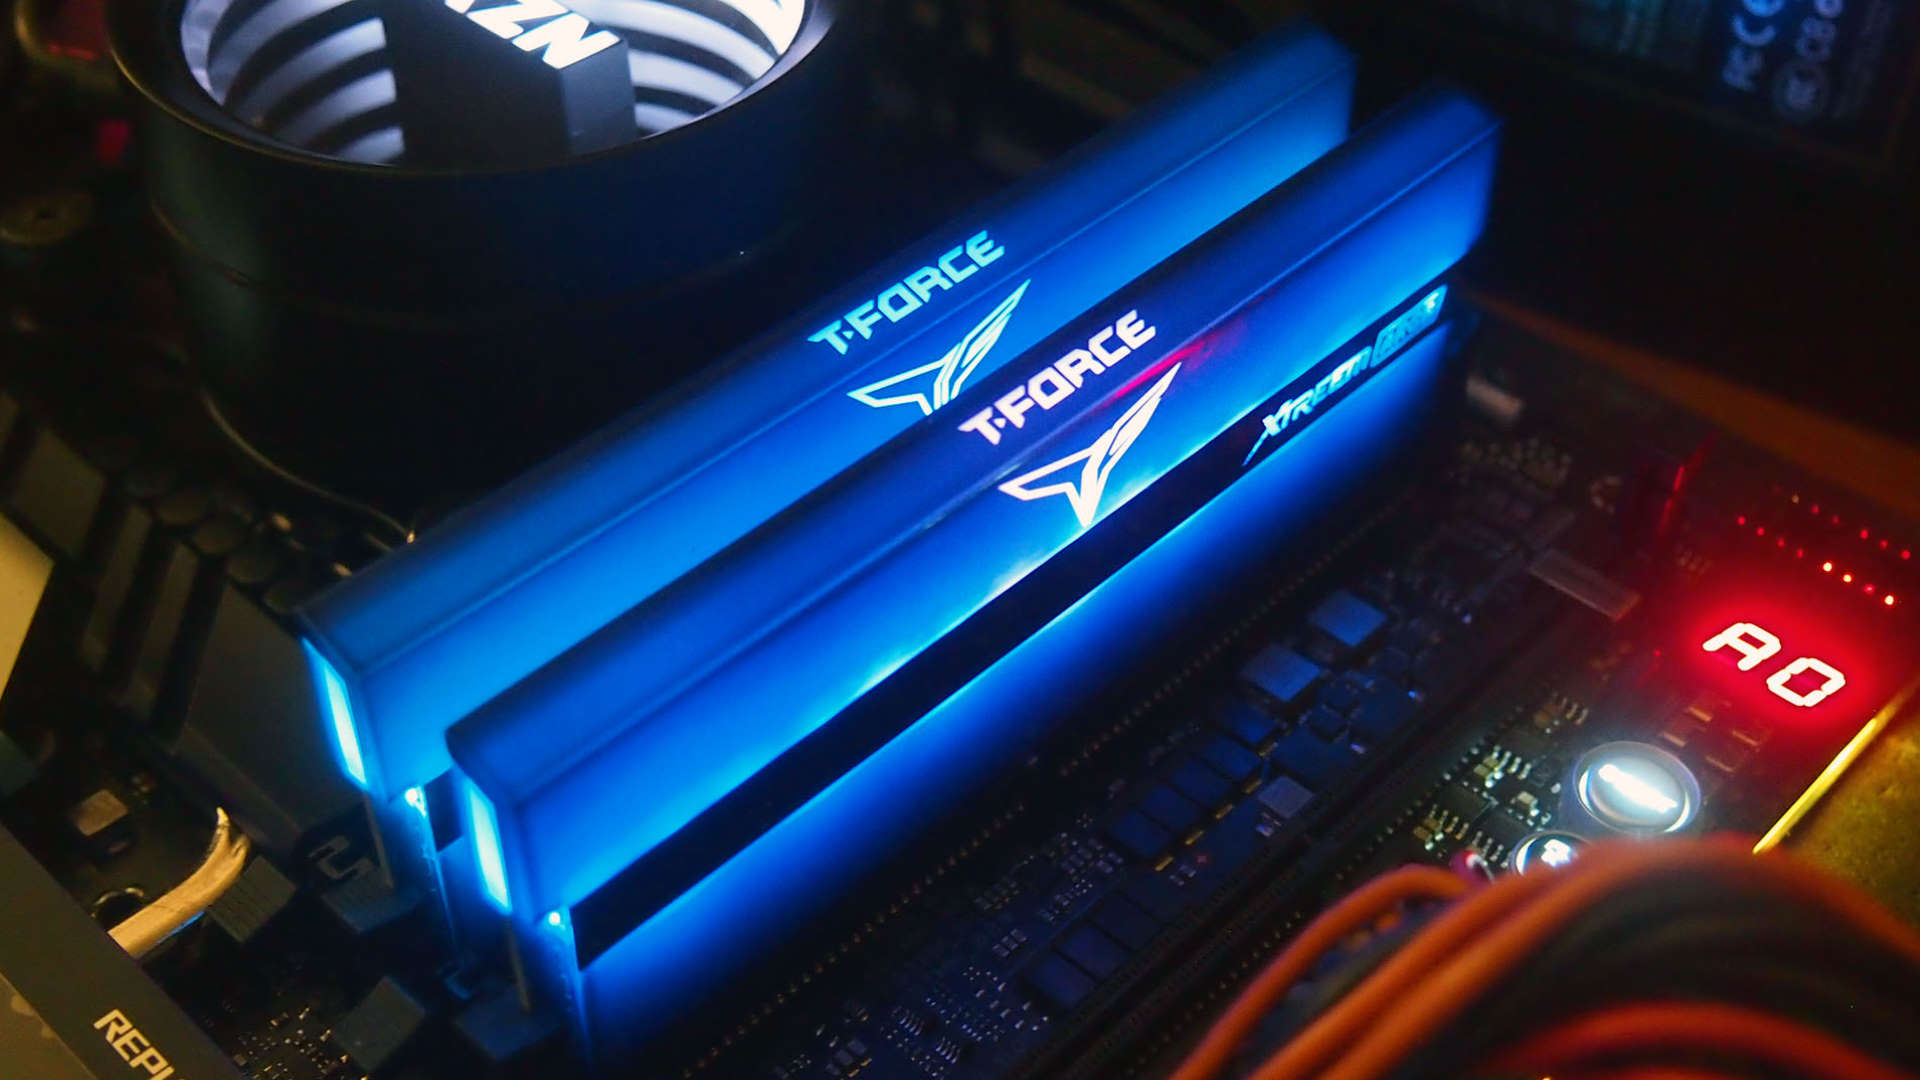 Best DDR4 RAM for gaming in 2022